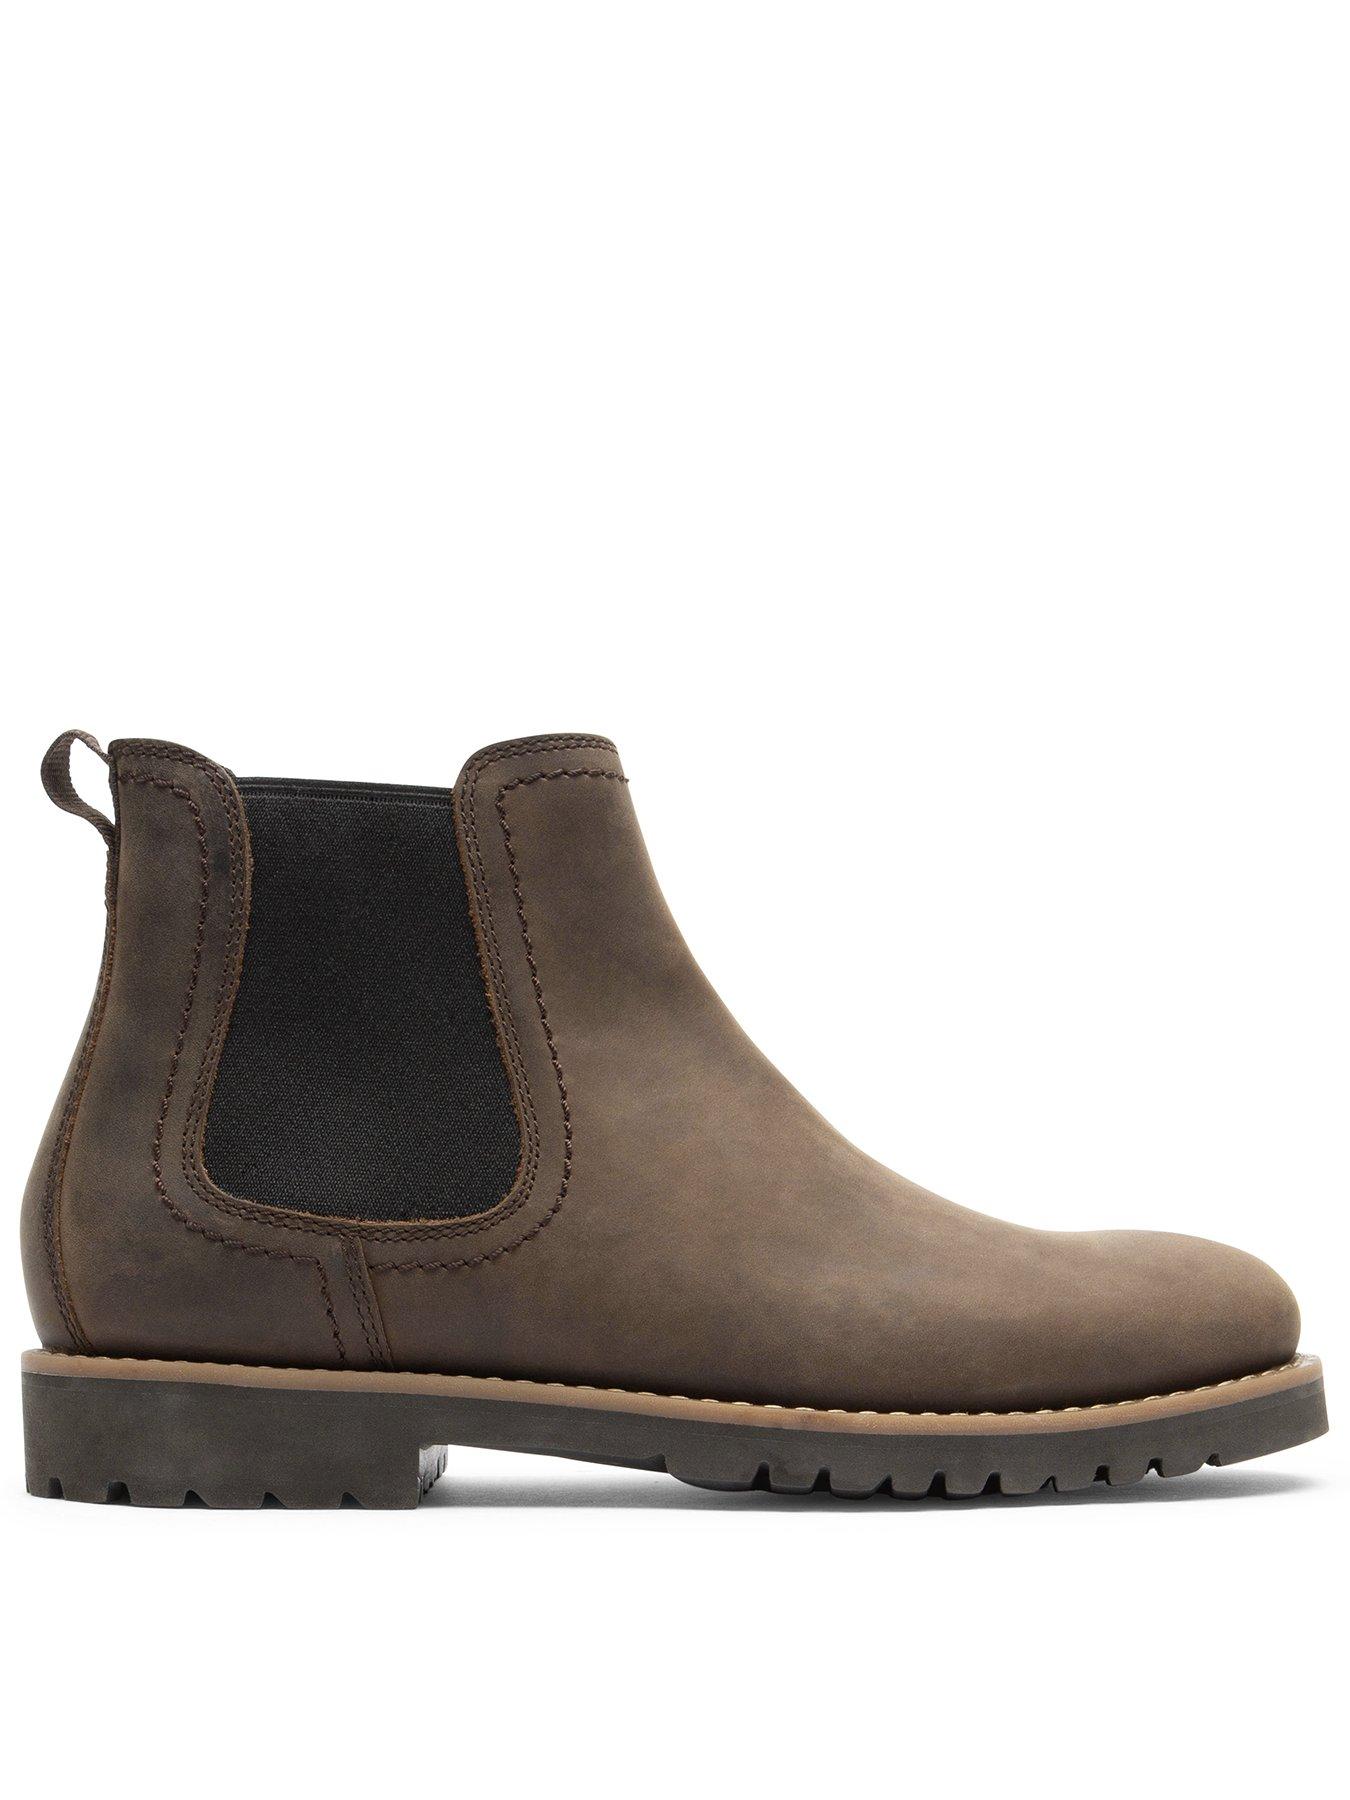 Rockport Mitchell Chelsea Boots - Java Brown | littlewoods.com